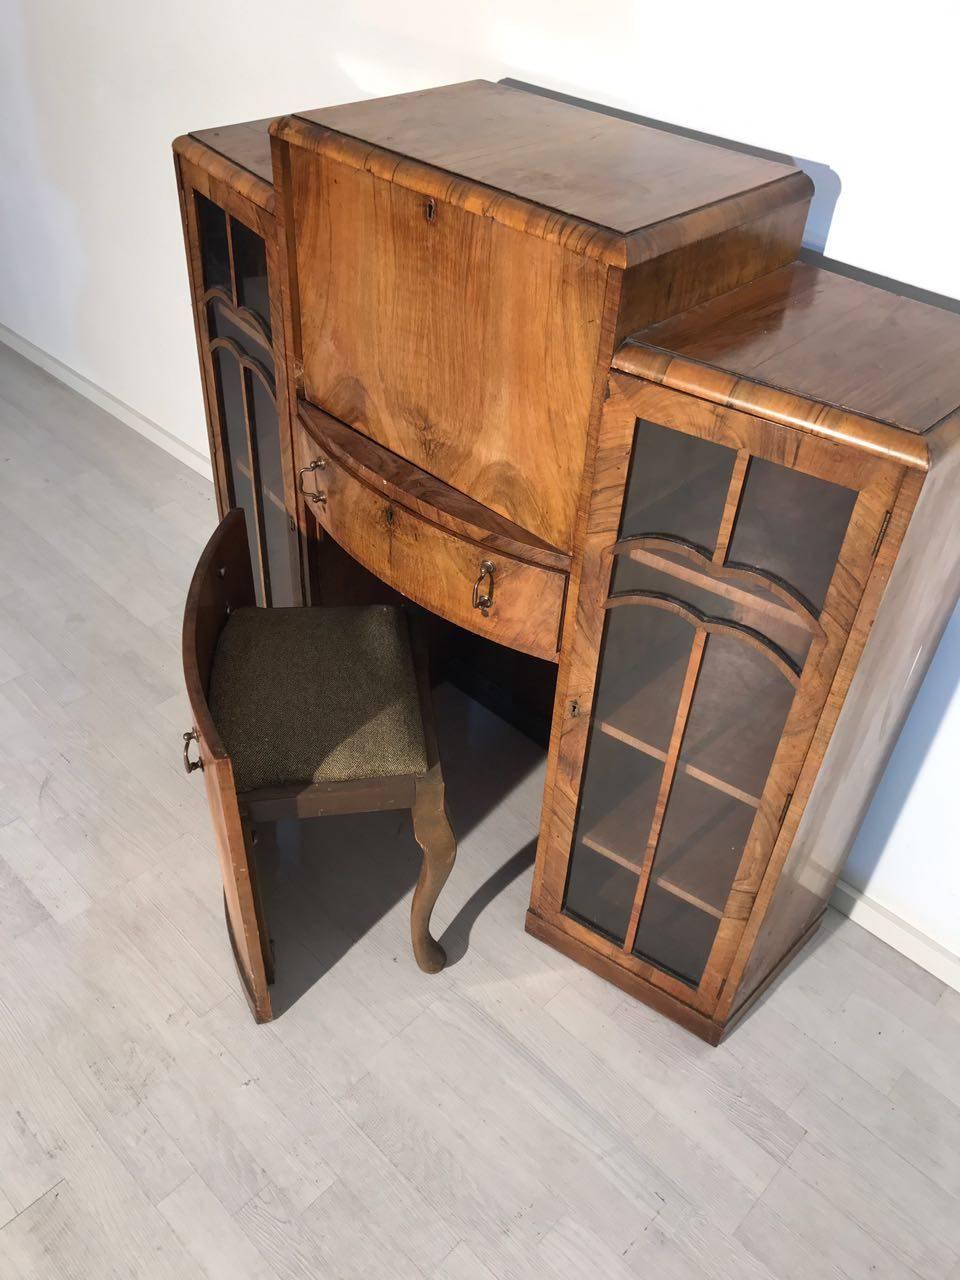 An Art Deco secretary in walnut wood. It offers a typical Art Deco design with glass doors accentuated by wood adornments, as well as integrated seating options. The brown wood has a wonderful grain and a great coloring game. The secretary is